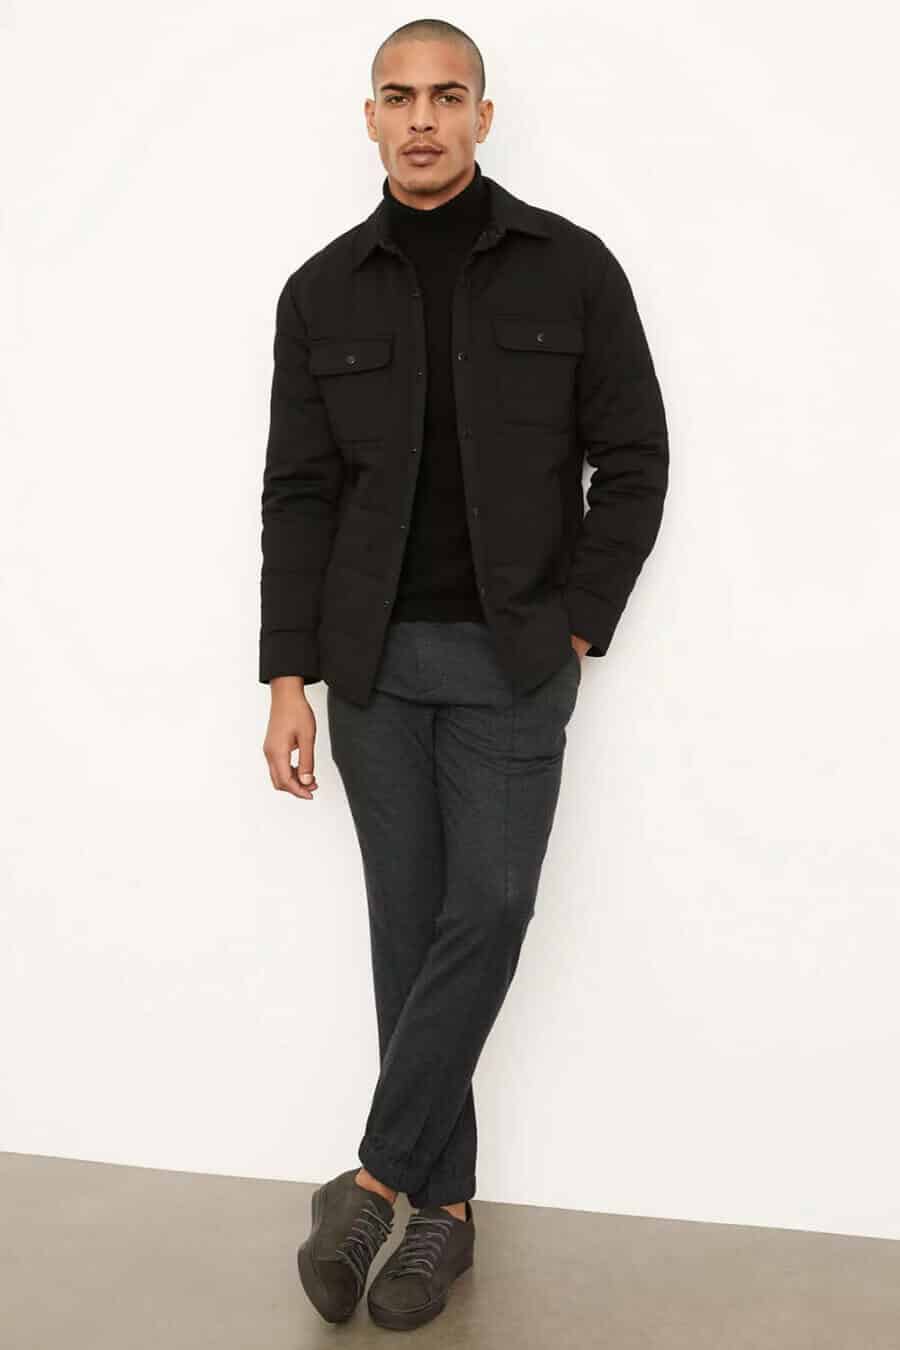 All black turtleneck outfit with overshirt and trousers